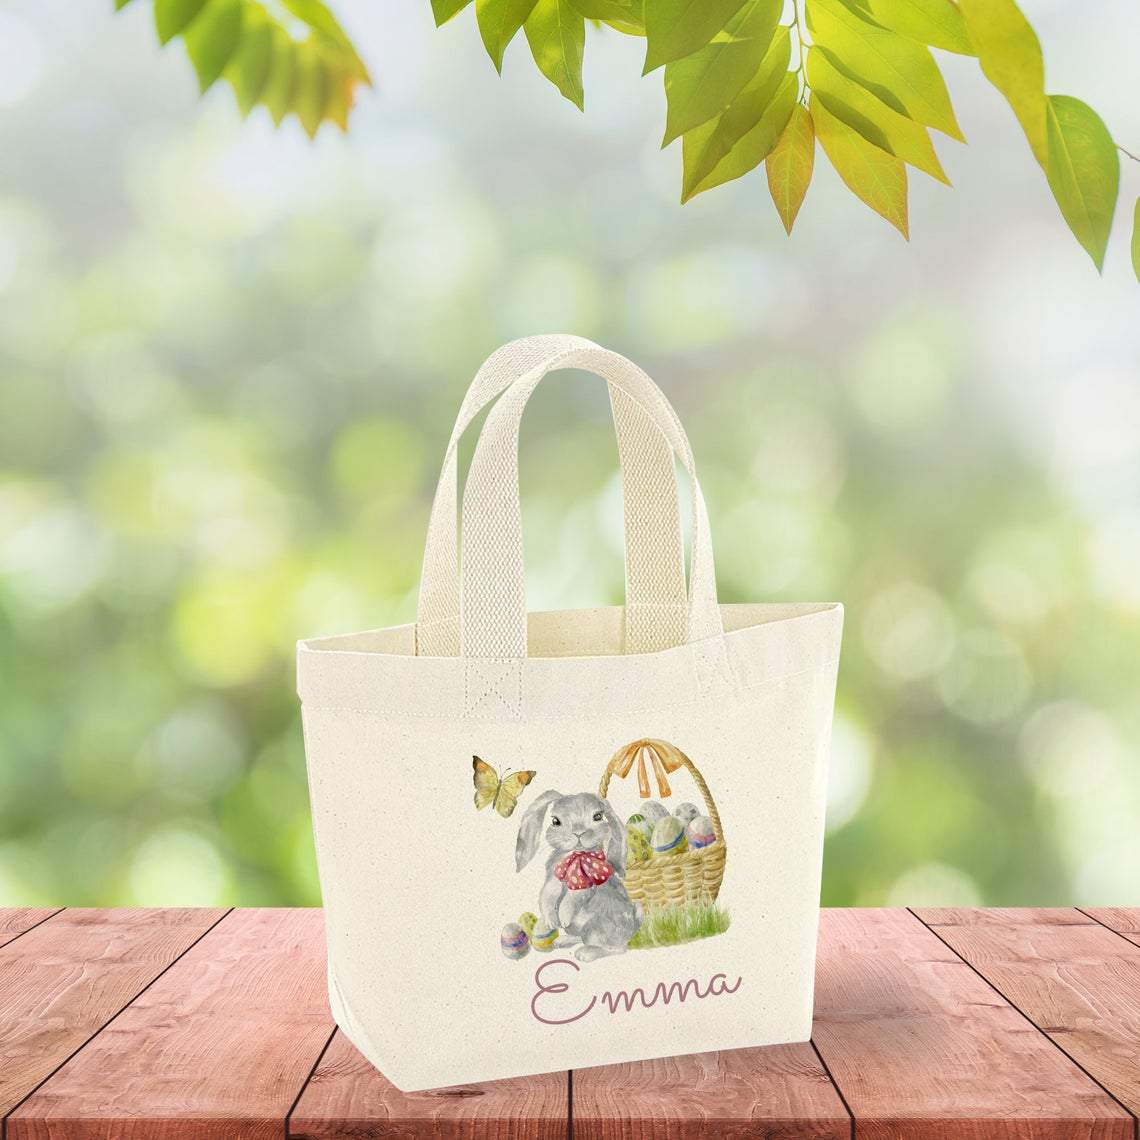 Personalised bunny mini Easter bag with name, Egg hunt bags, Girls or boys baskets